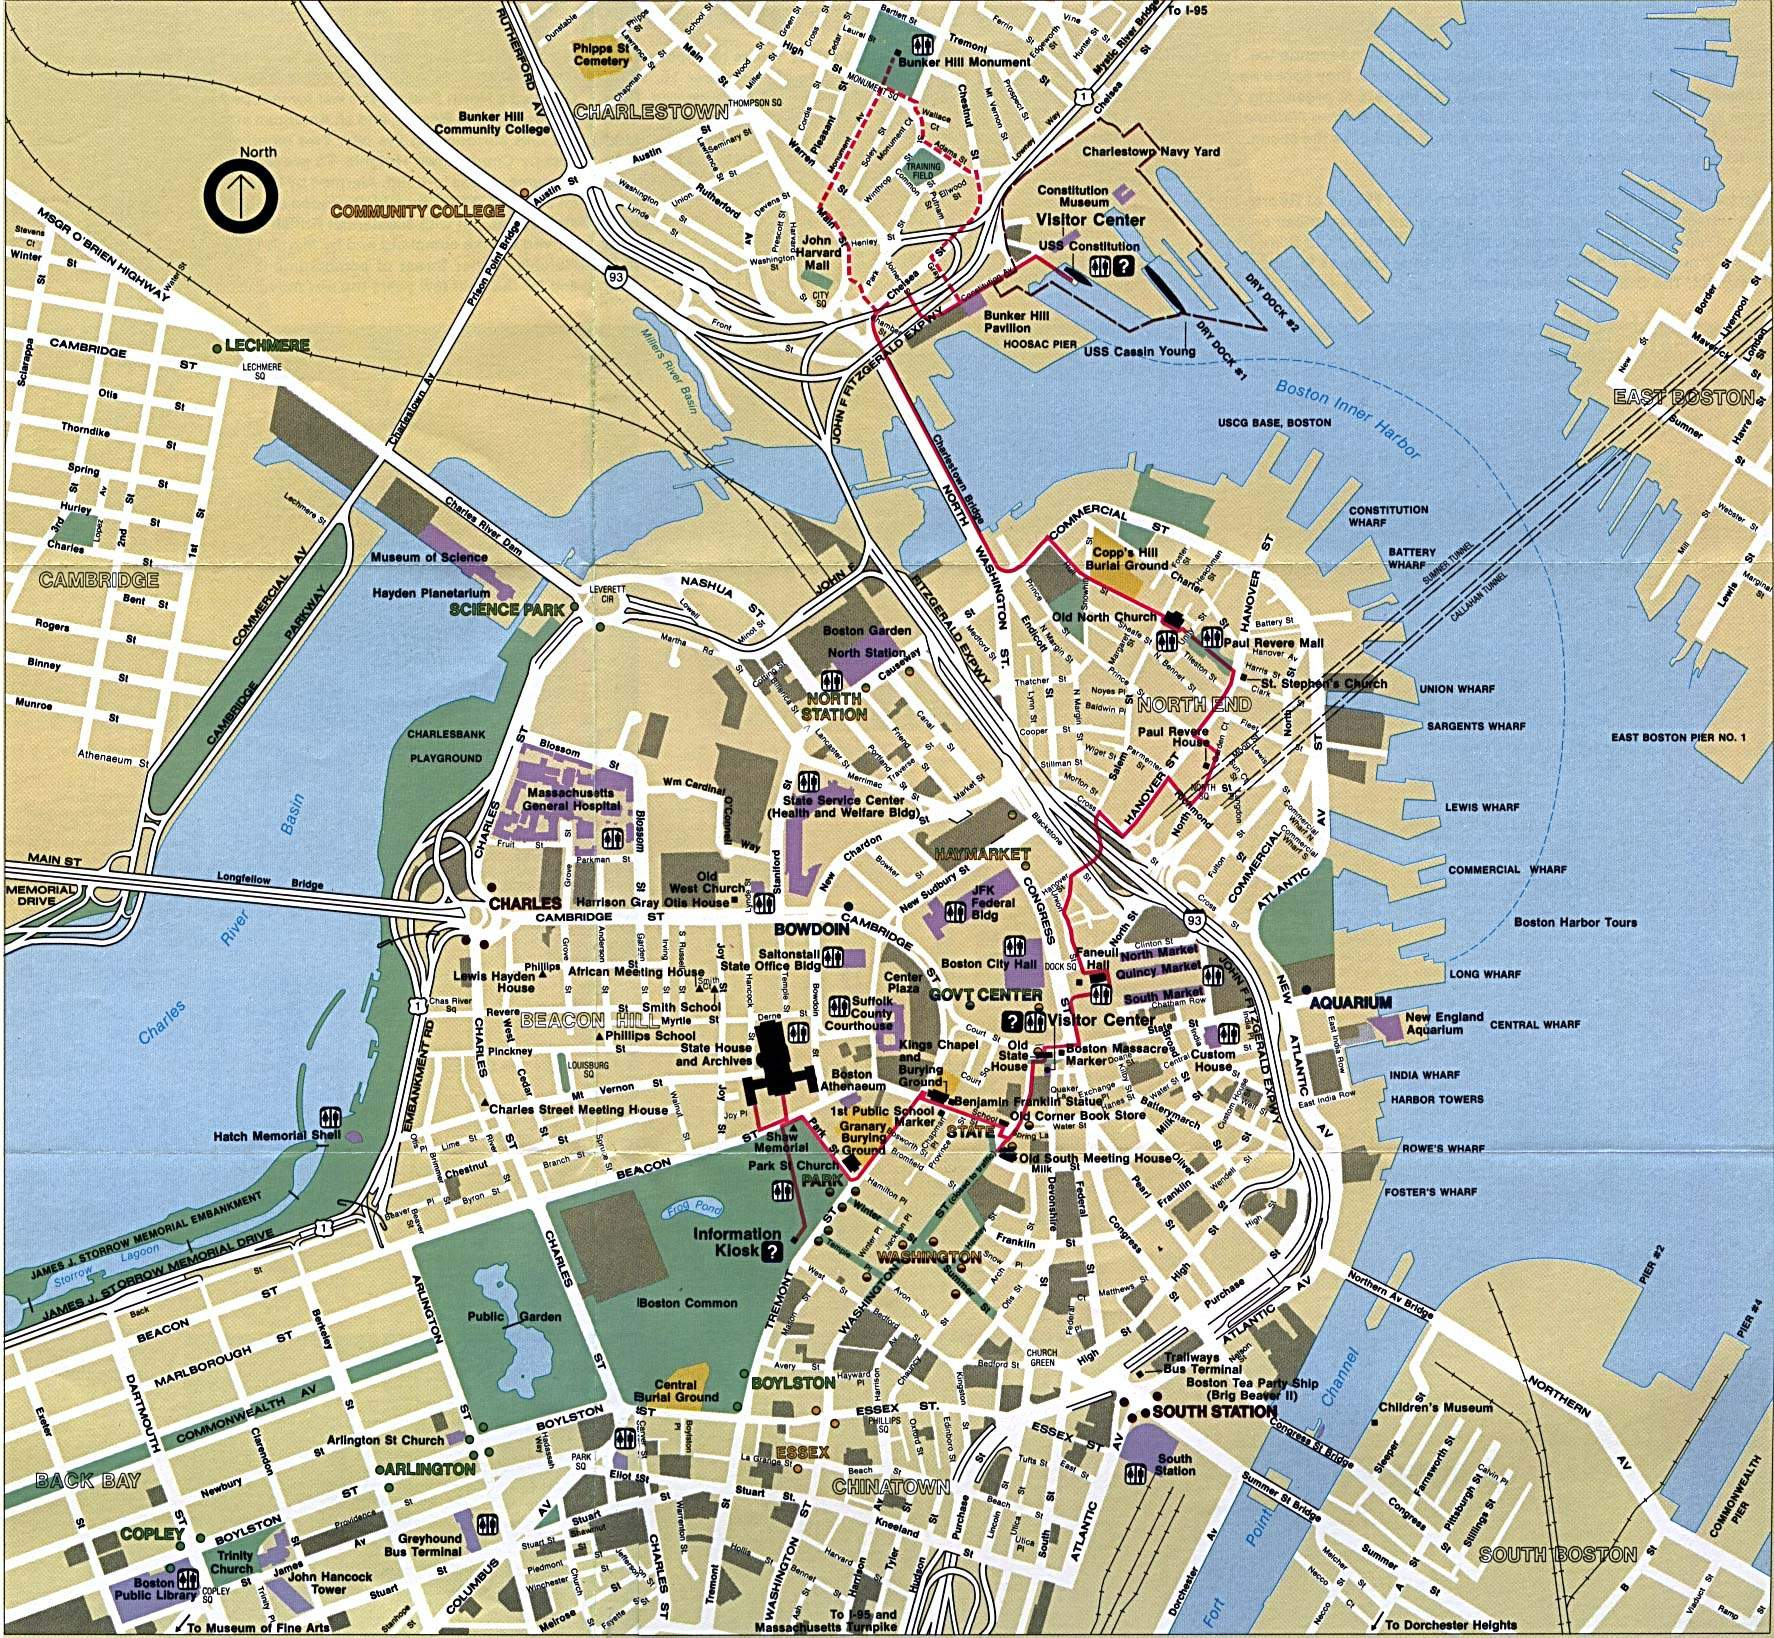 Large Boston Maps For Free Download And Print | High-Resolution And - Boston Tourist Map Printable